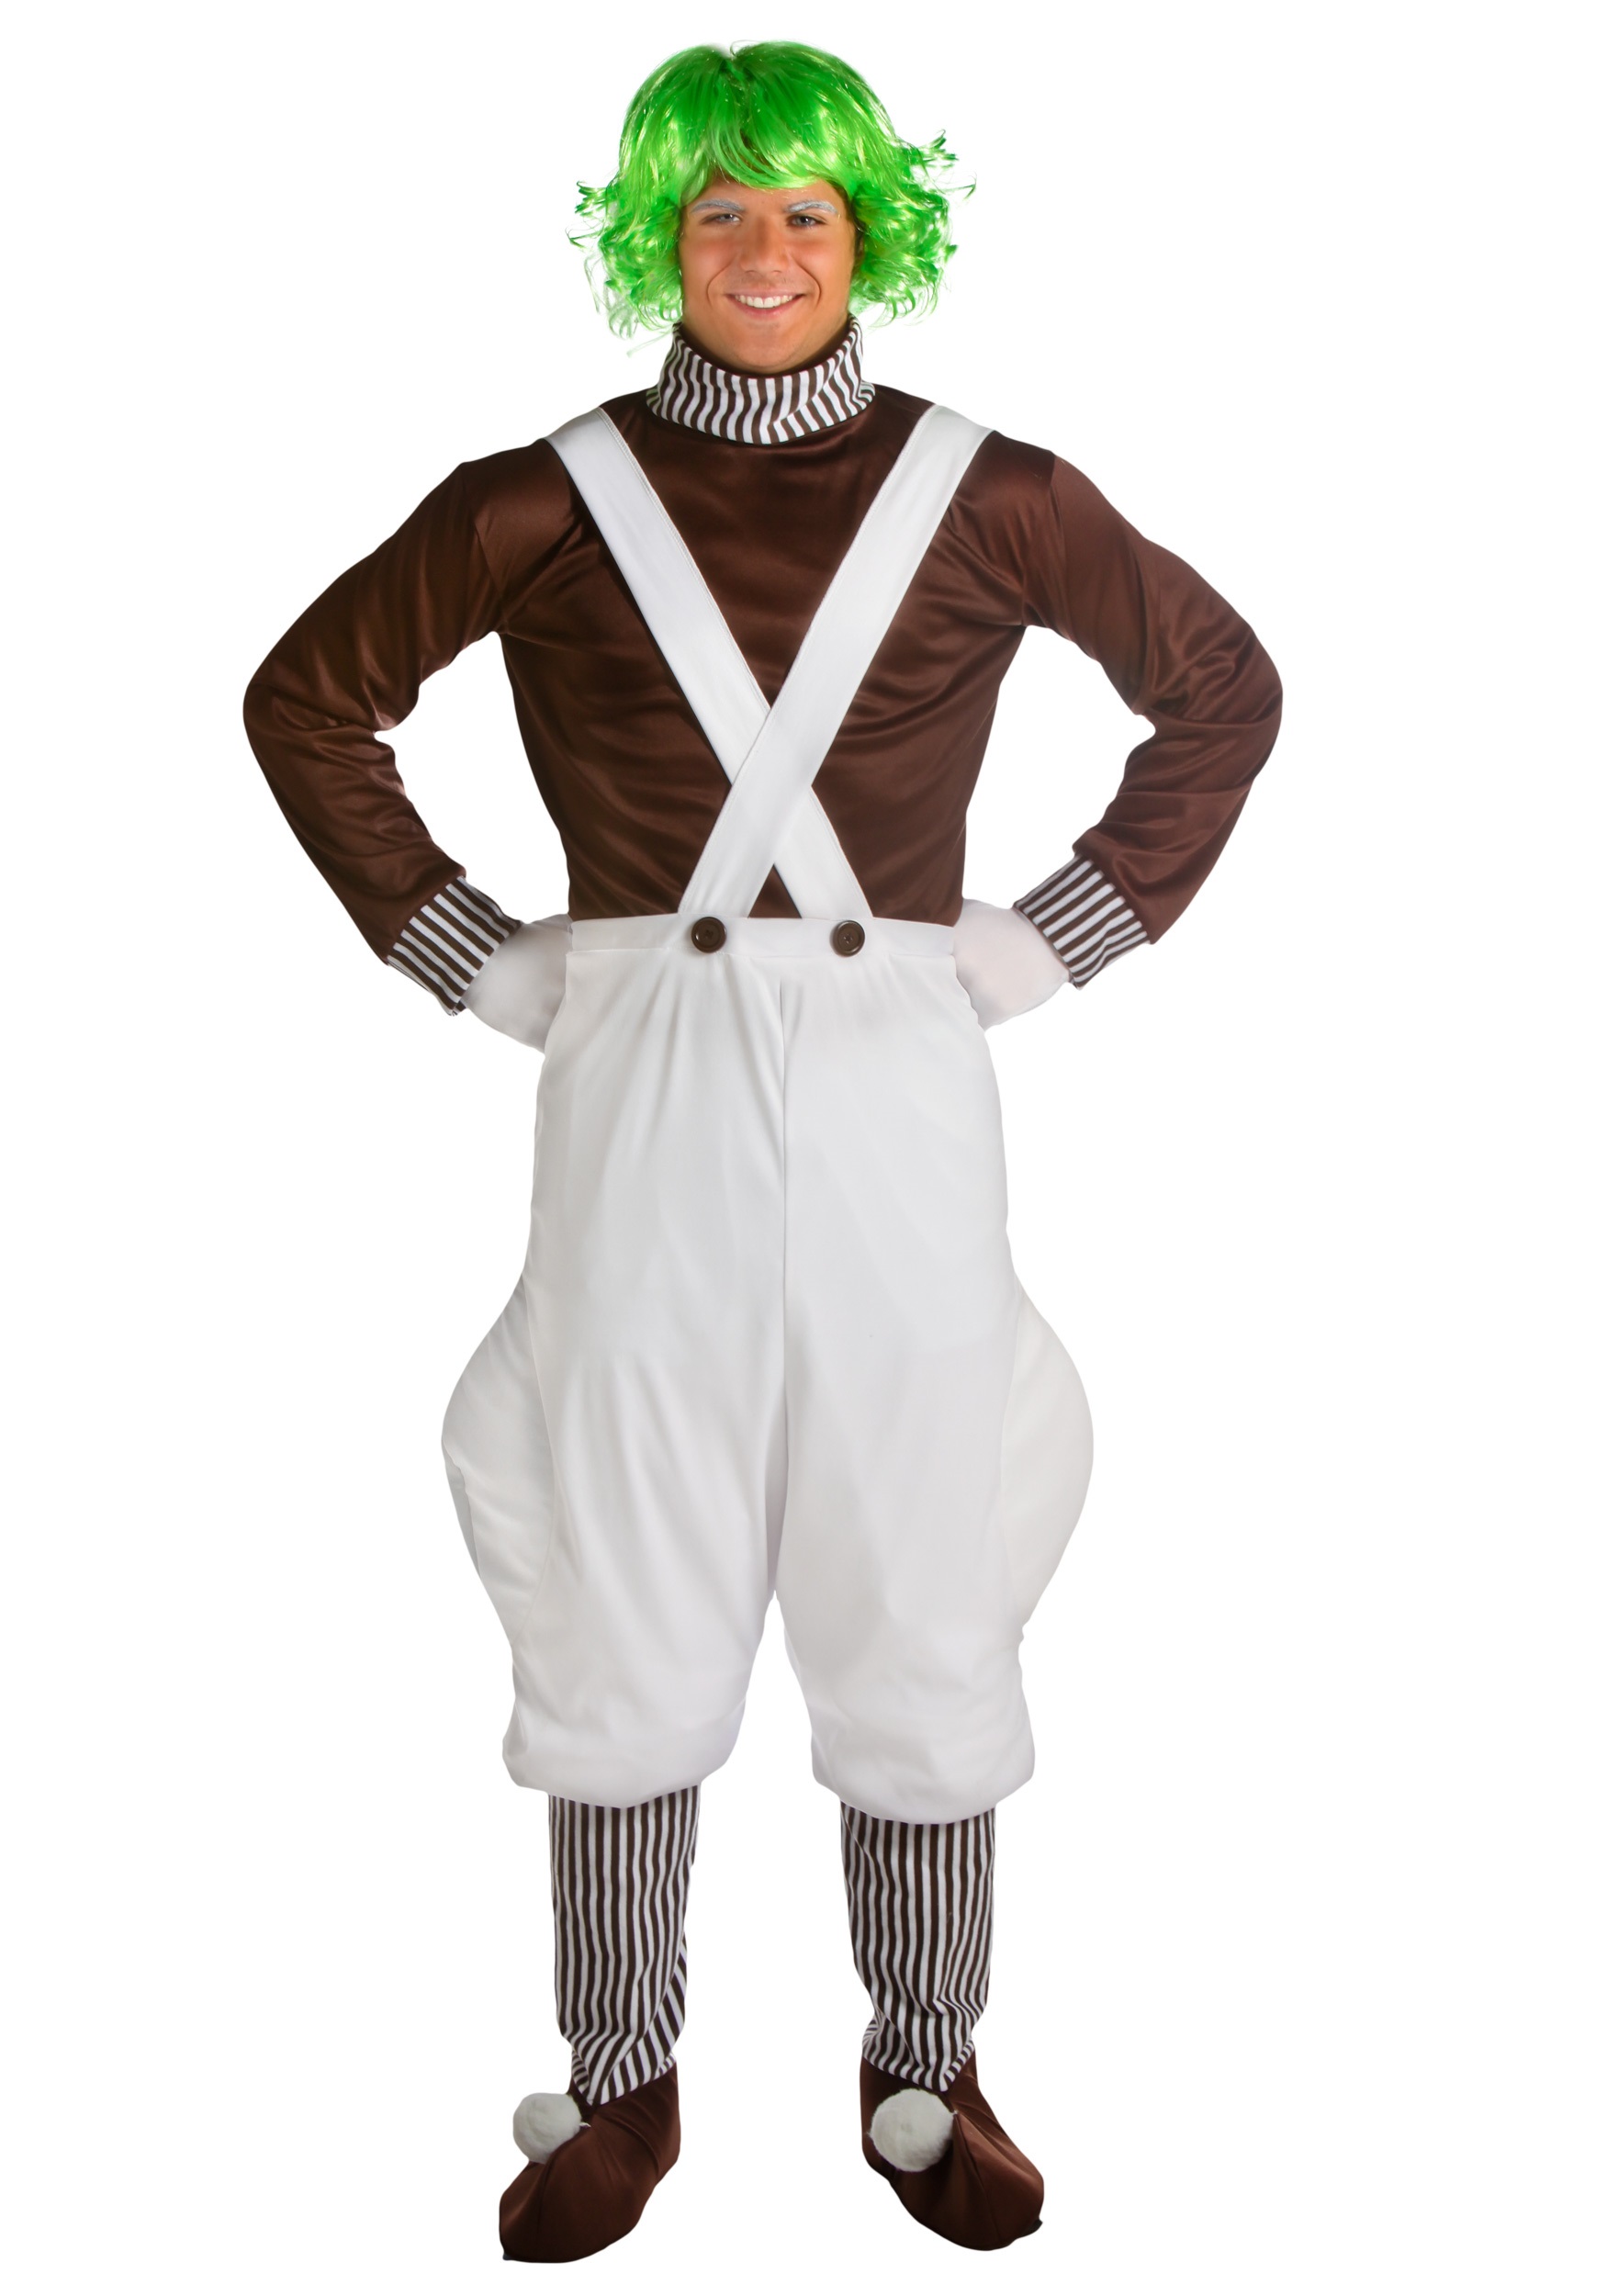 Chocolate Factory Worker Plus Size Costume for Men